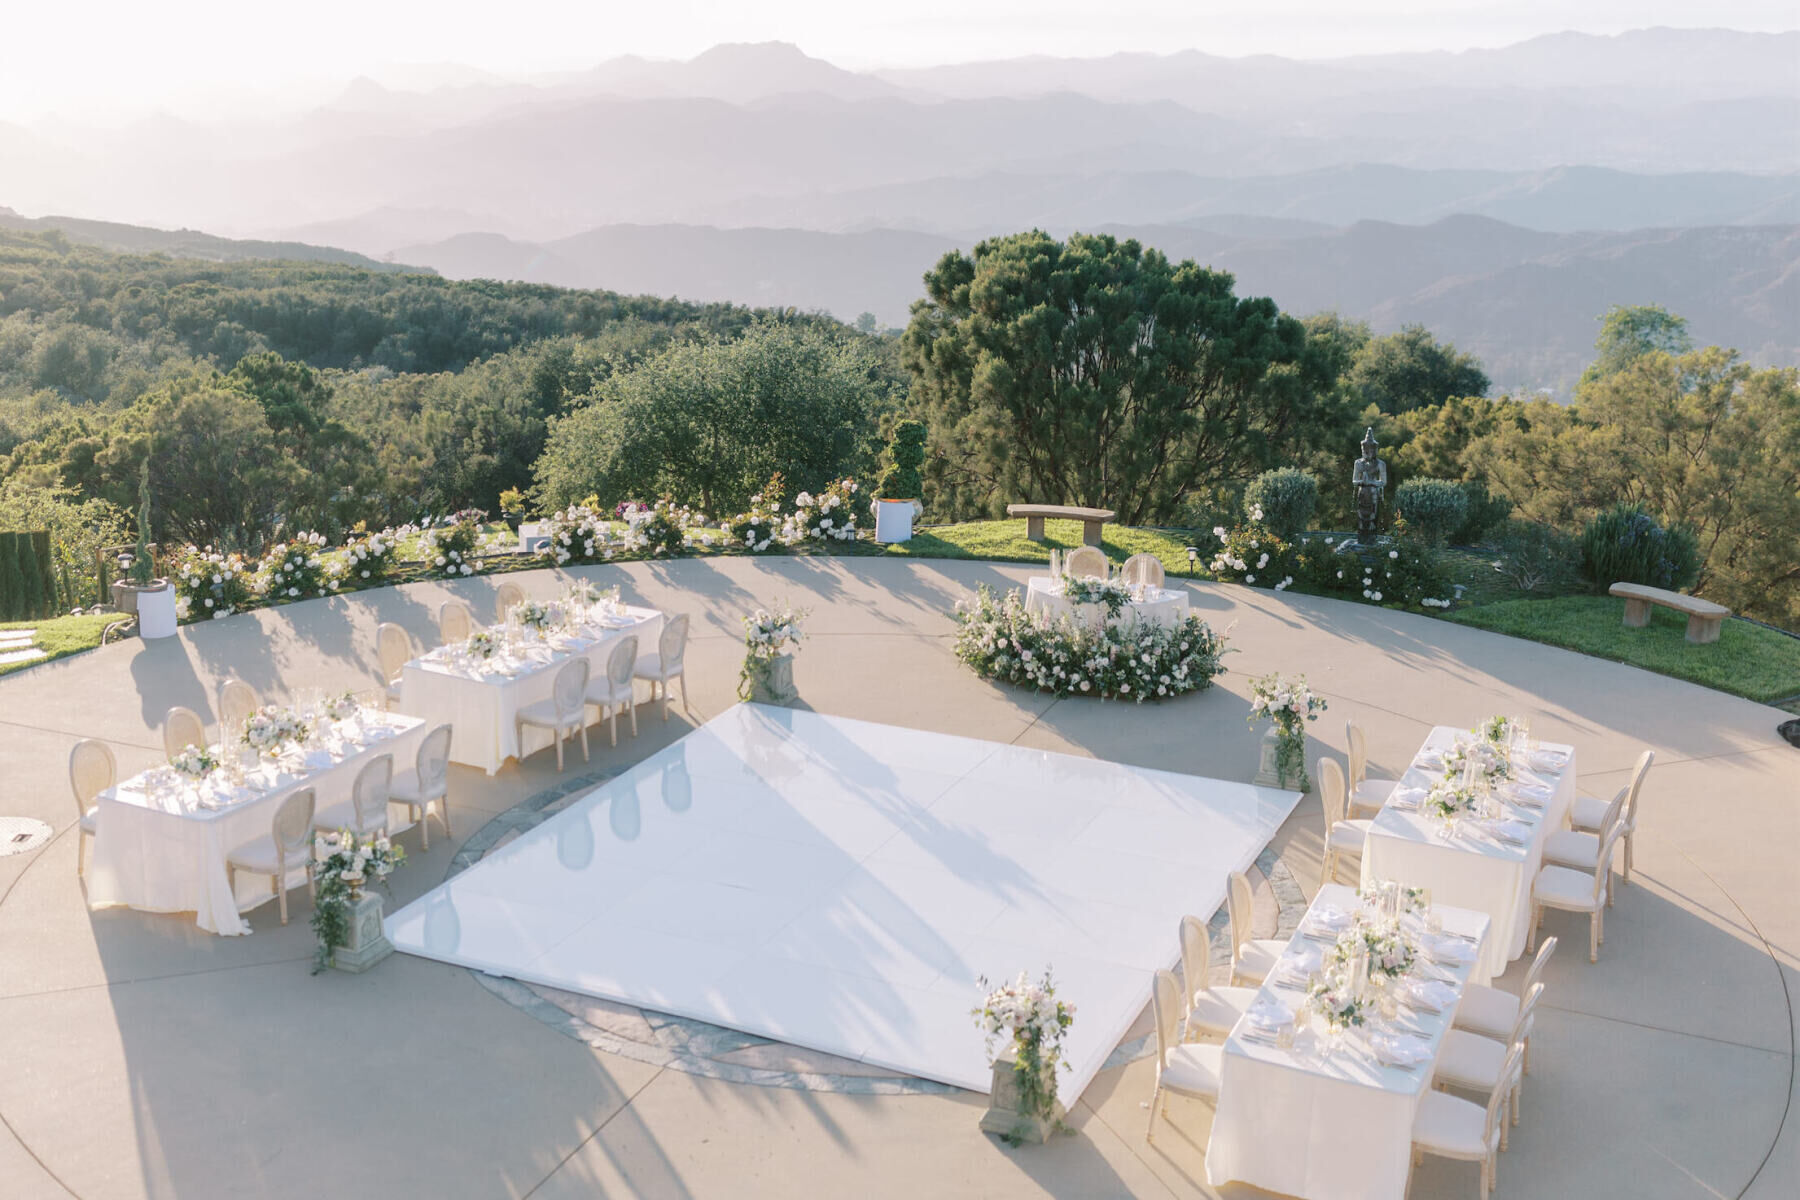 An intimate  wedding reception set up at a scenic private estate, overlooking the hills of Malibu.